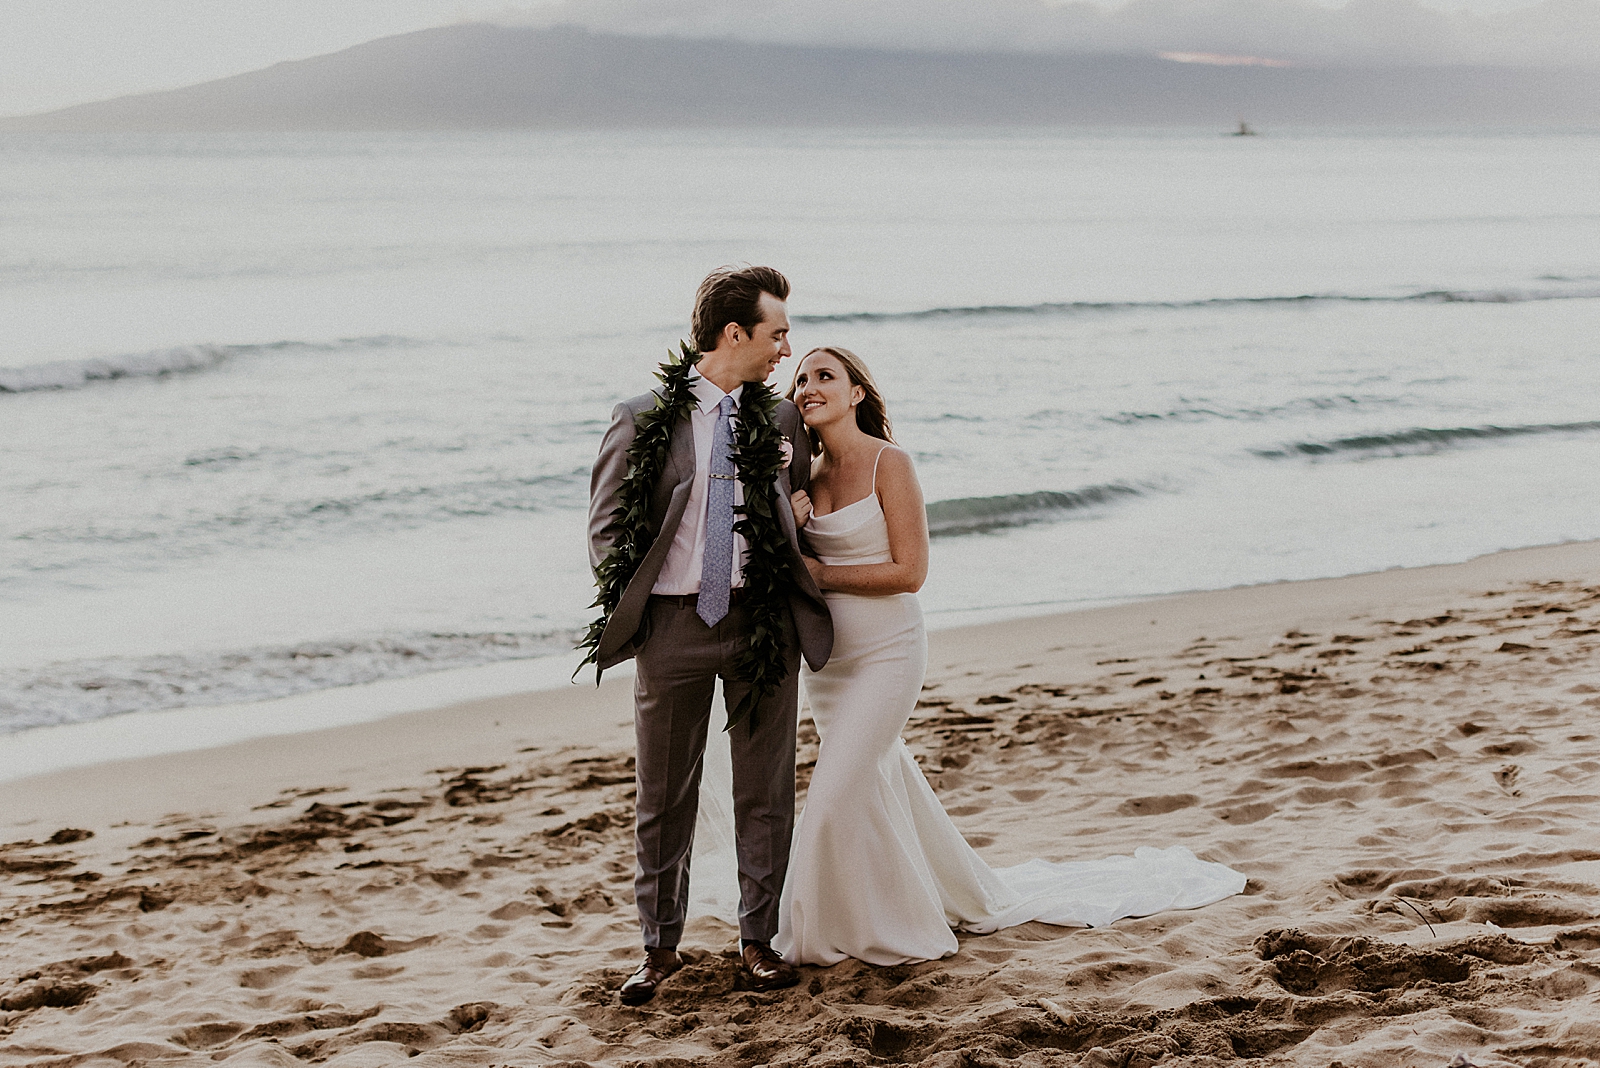 Bride holding Groom's arm and looking at him by the ocean water